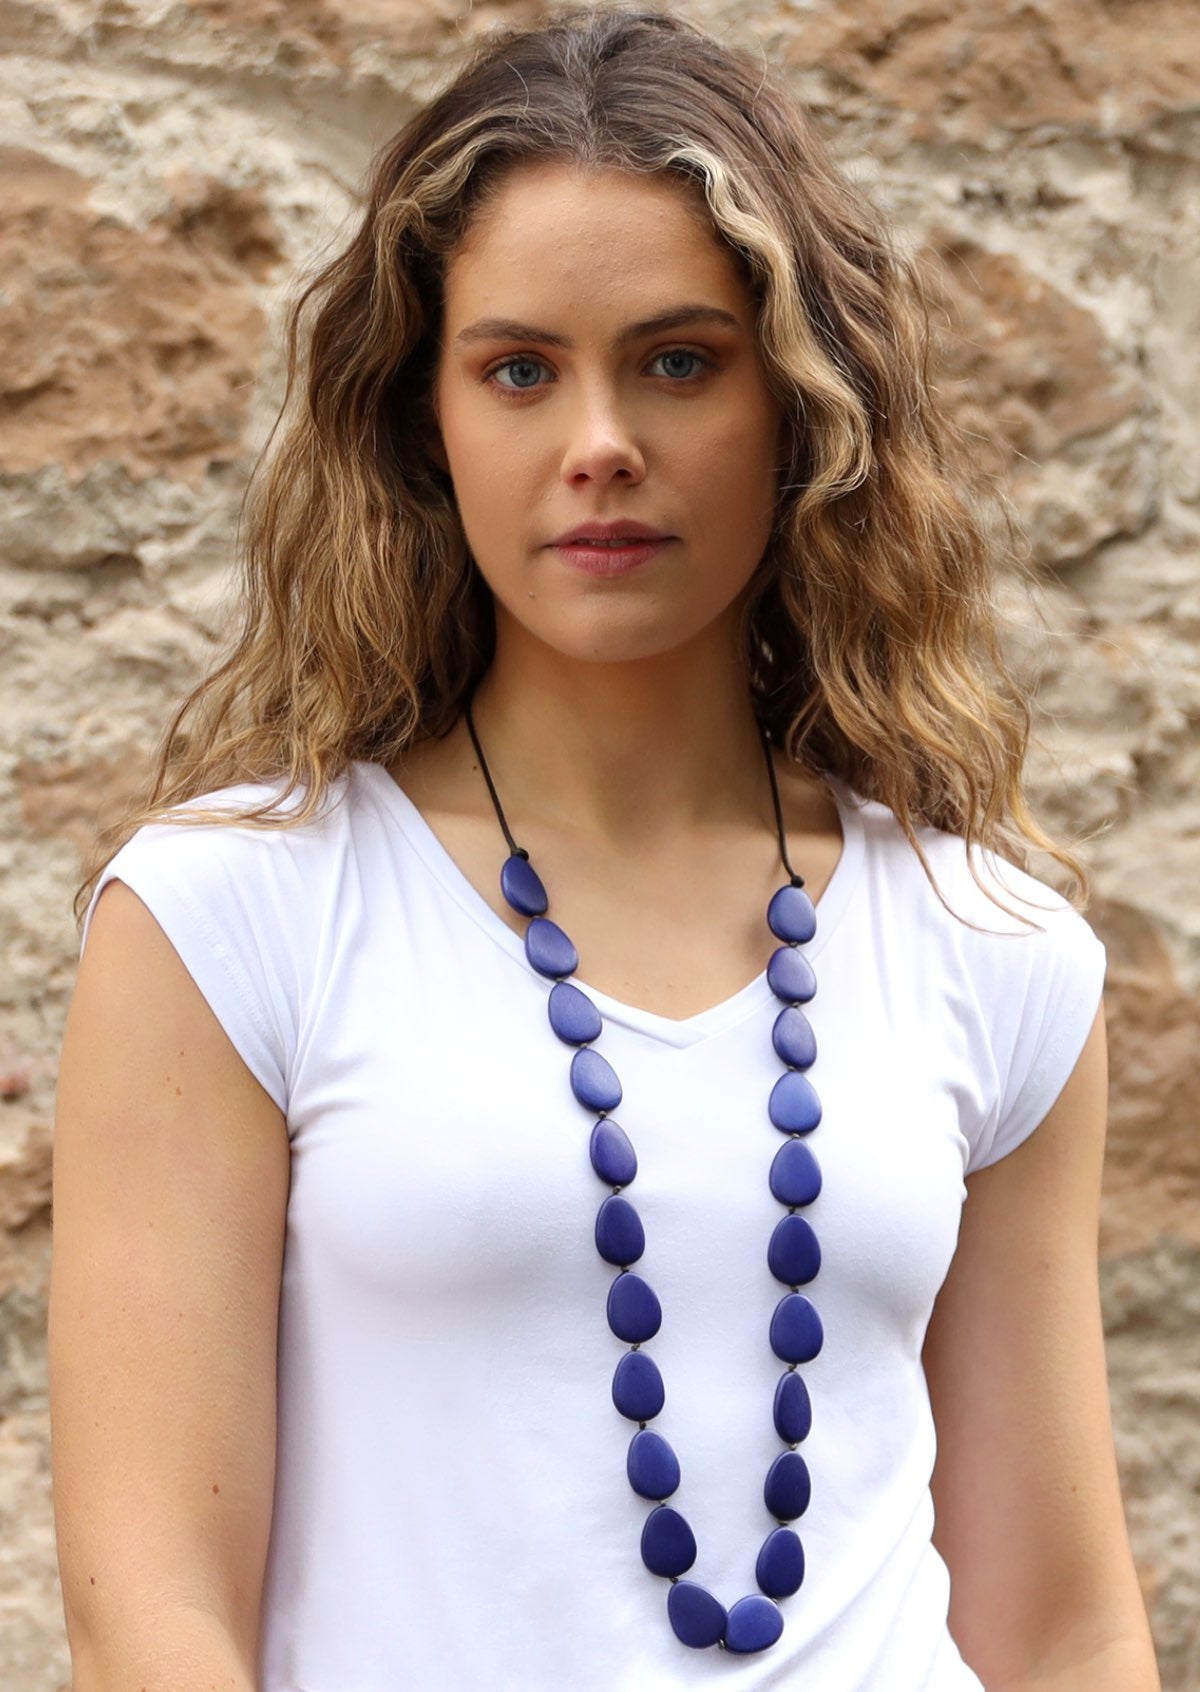 Cobalt Blue Sea Glass Necklace With Pearls | Sea Glass Necklace